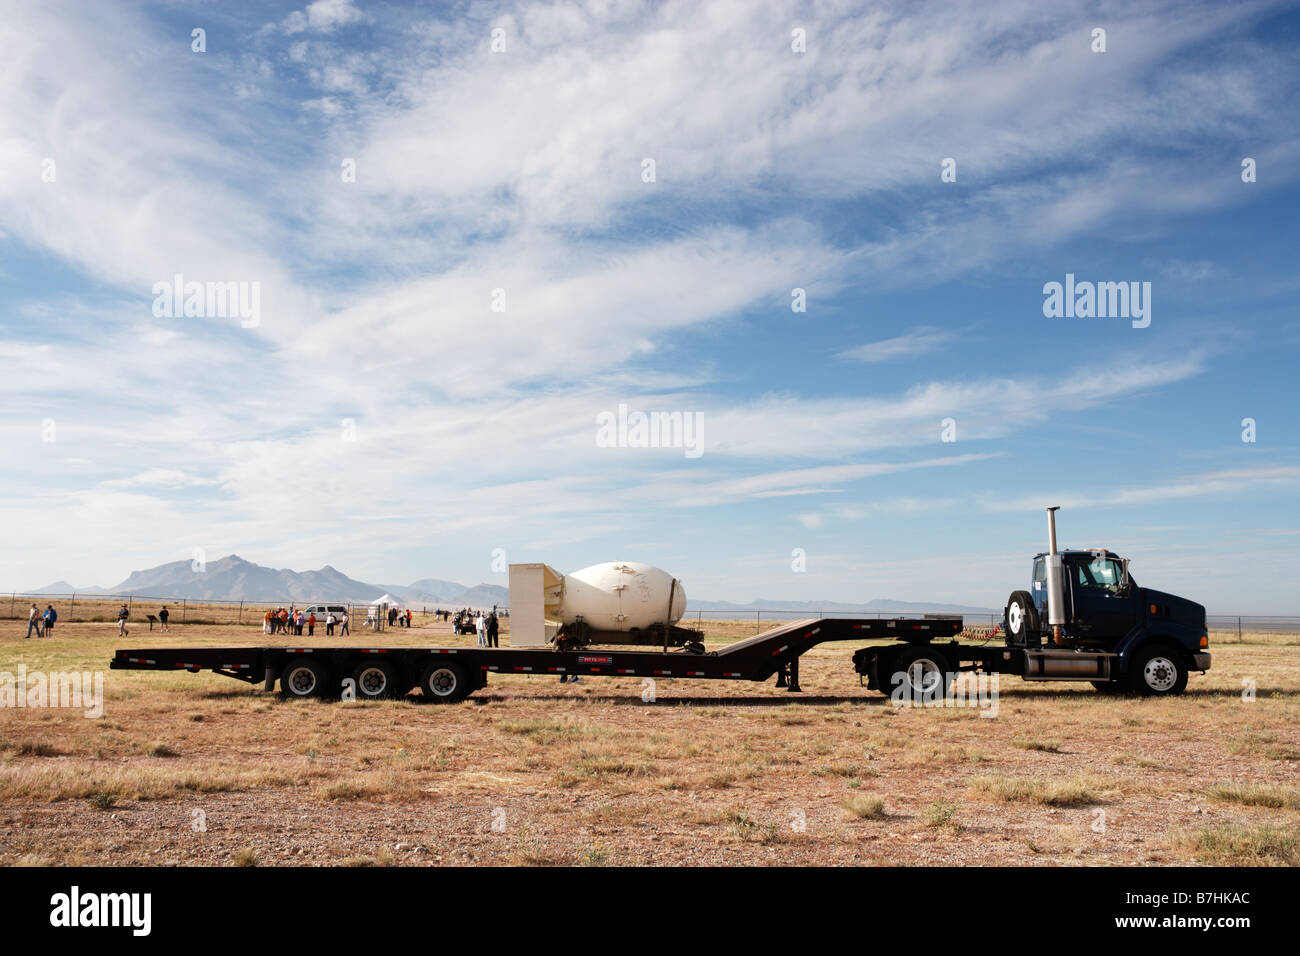 'Fat Man' Bomb Casing design on display at Trinity Site, NM, site of the world's first atomic bomb explosion in 1945. Stock Photo